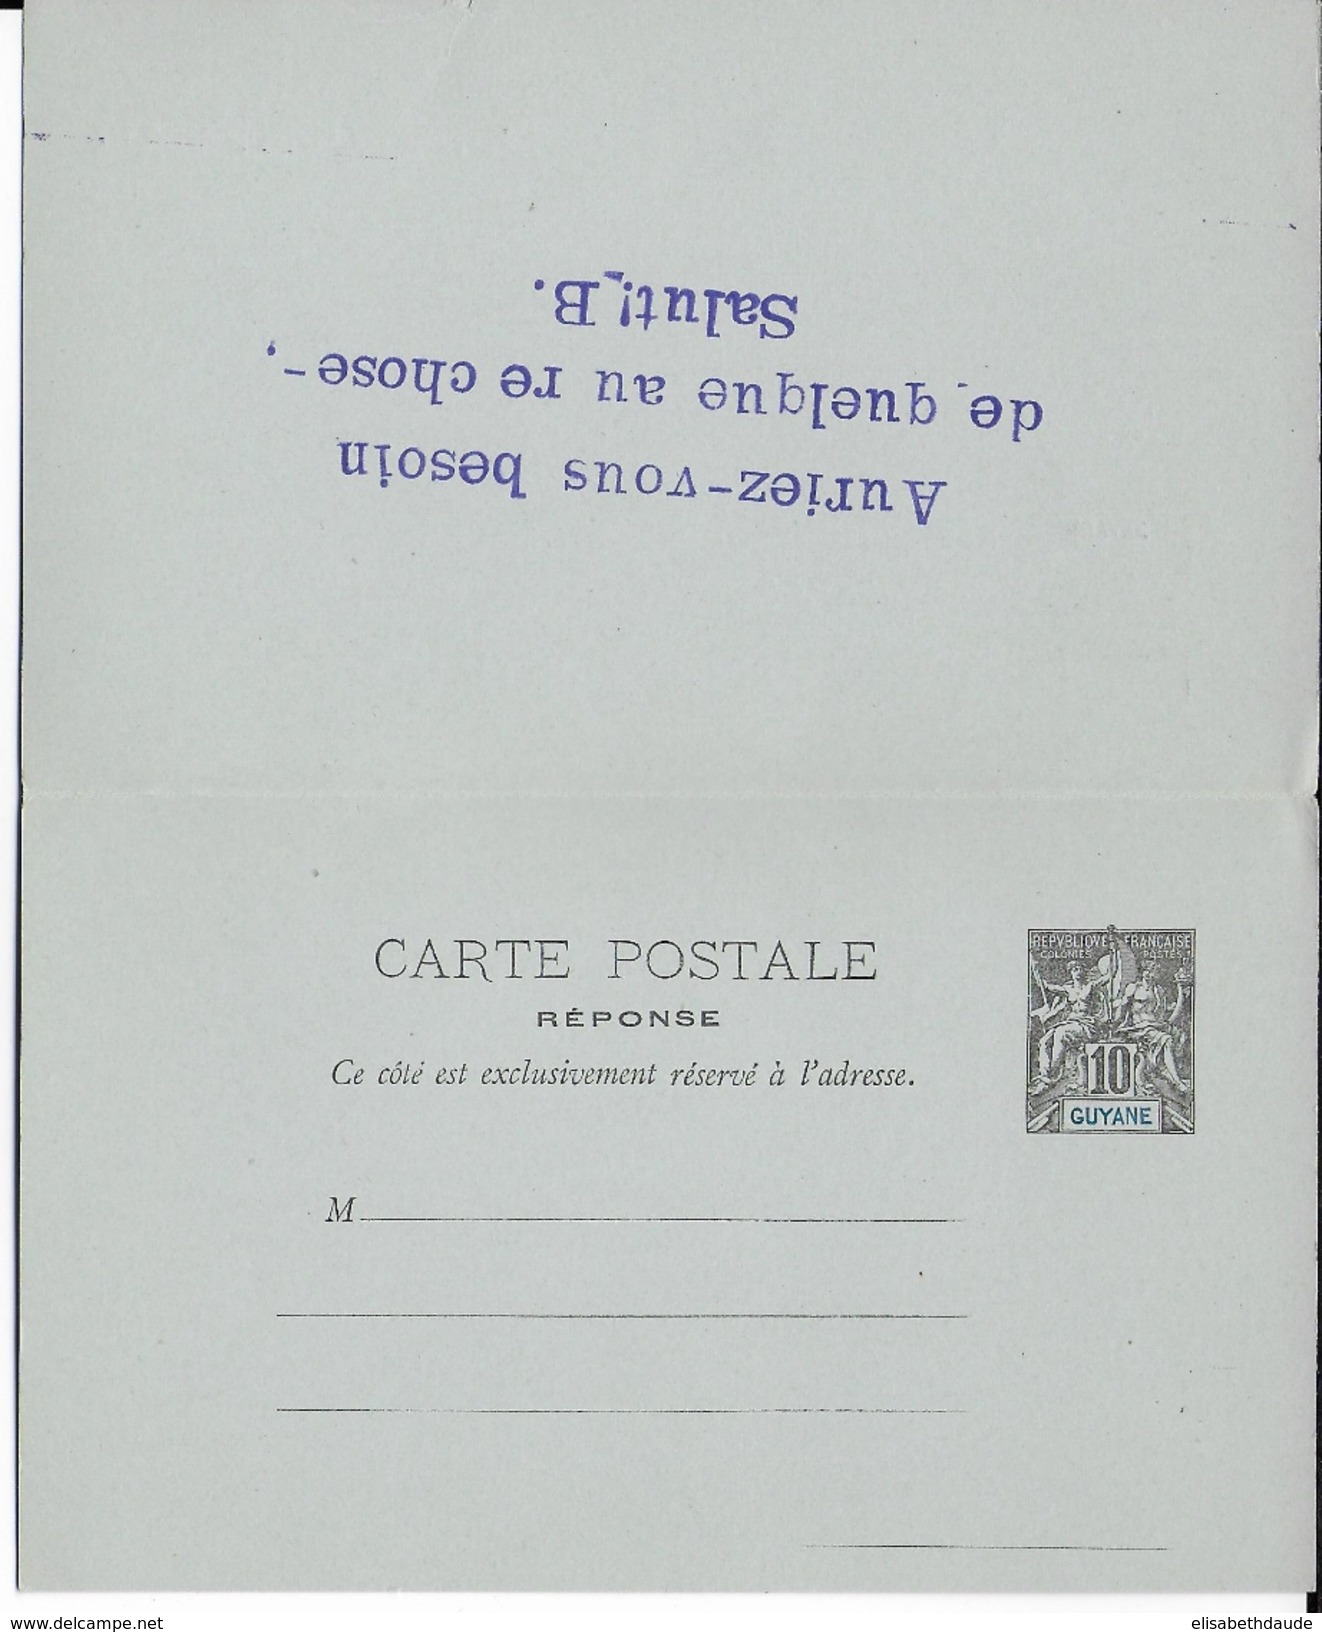 GUYANE - 1898 - CARTE ENTIER TYPE GROUPE Avec REPONSE PAYEE 140X87 De CAYENNE => OPPELN (SILESIE ALLEMANDE) - Lettres & Documents